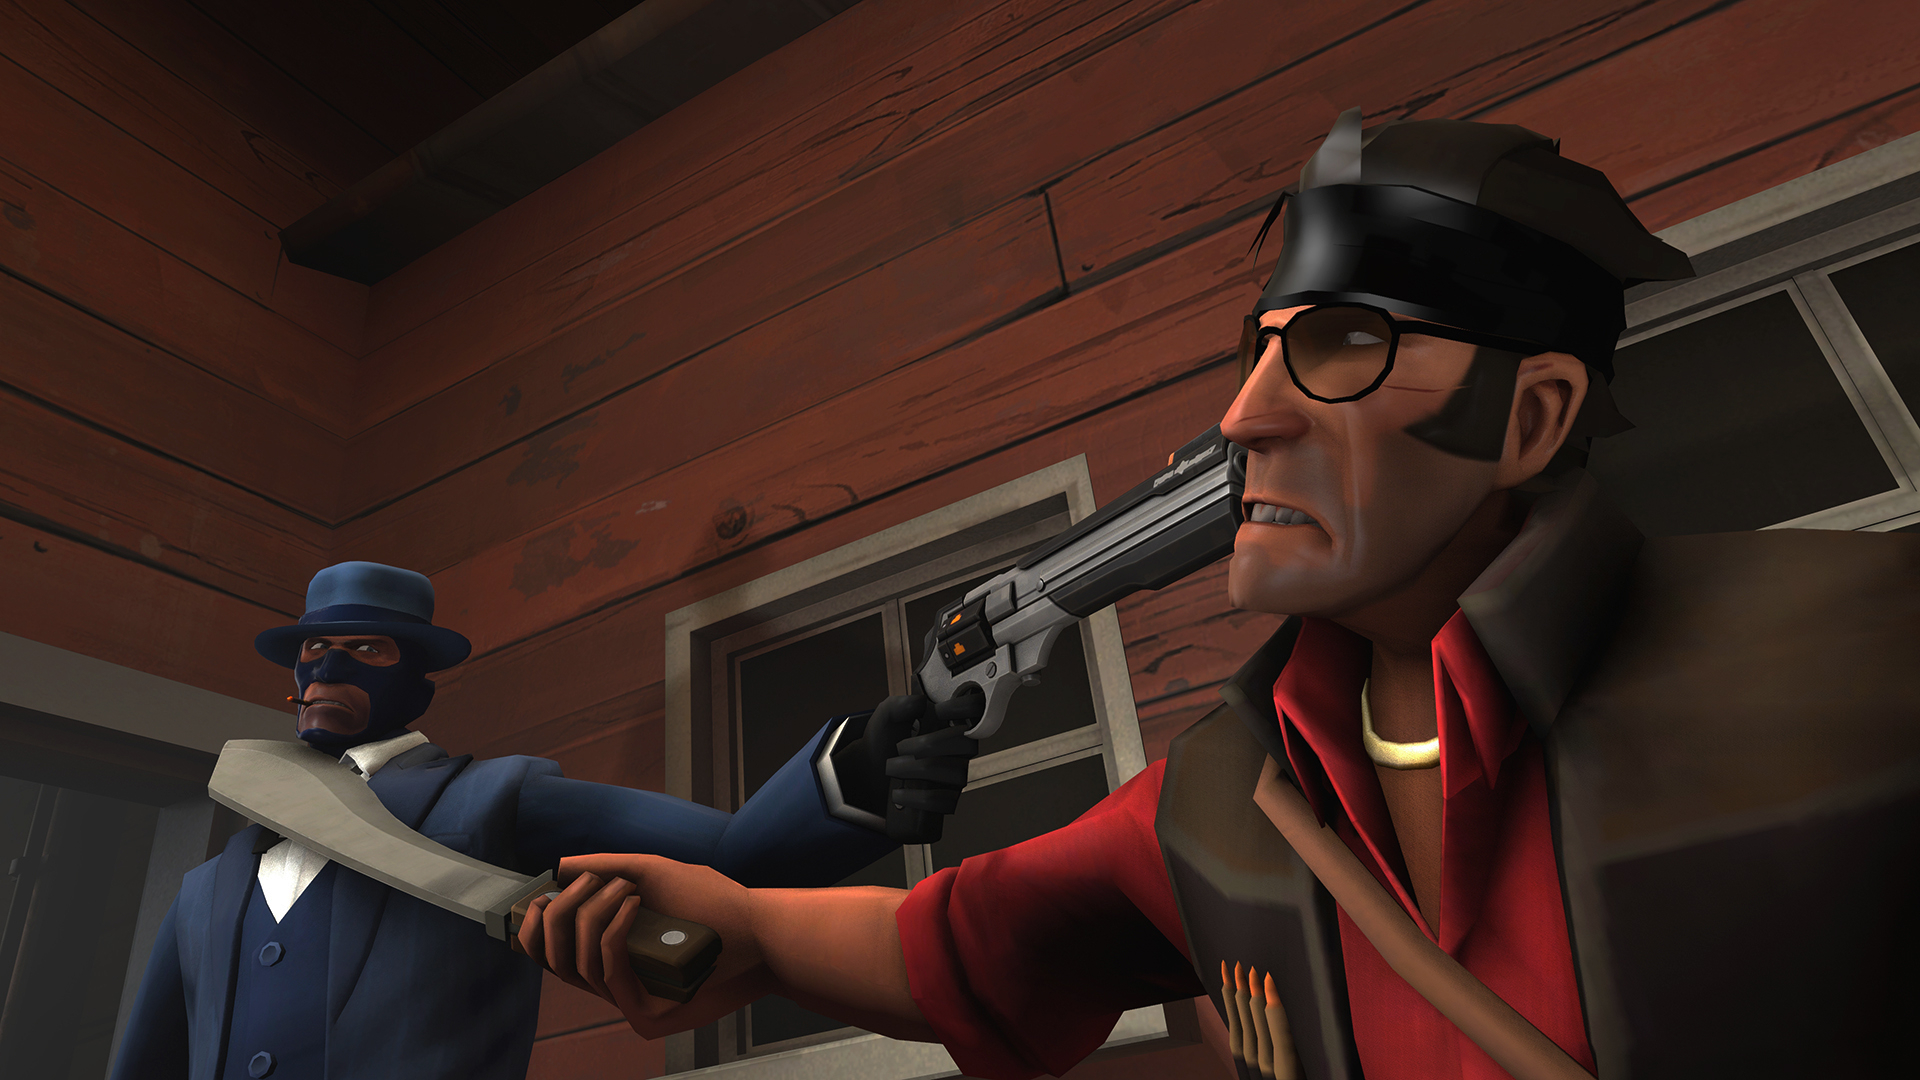 1920x1080 10+ Spy (Team Fortress) HD Wallpapers and Backgrounds